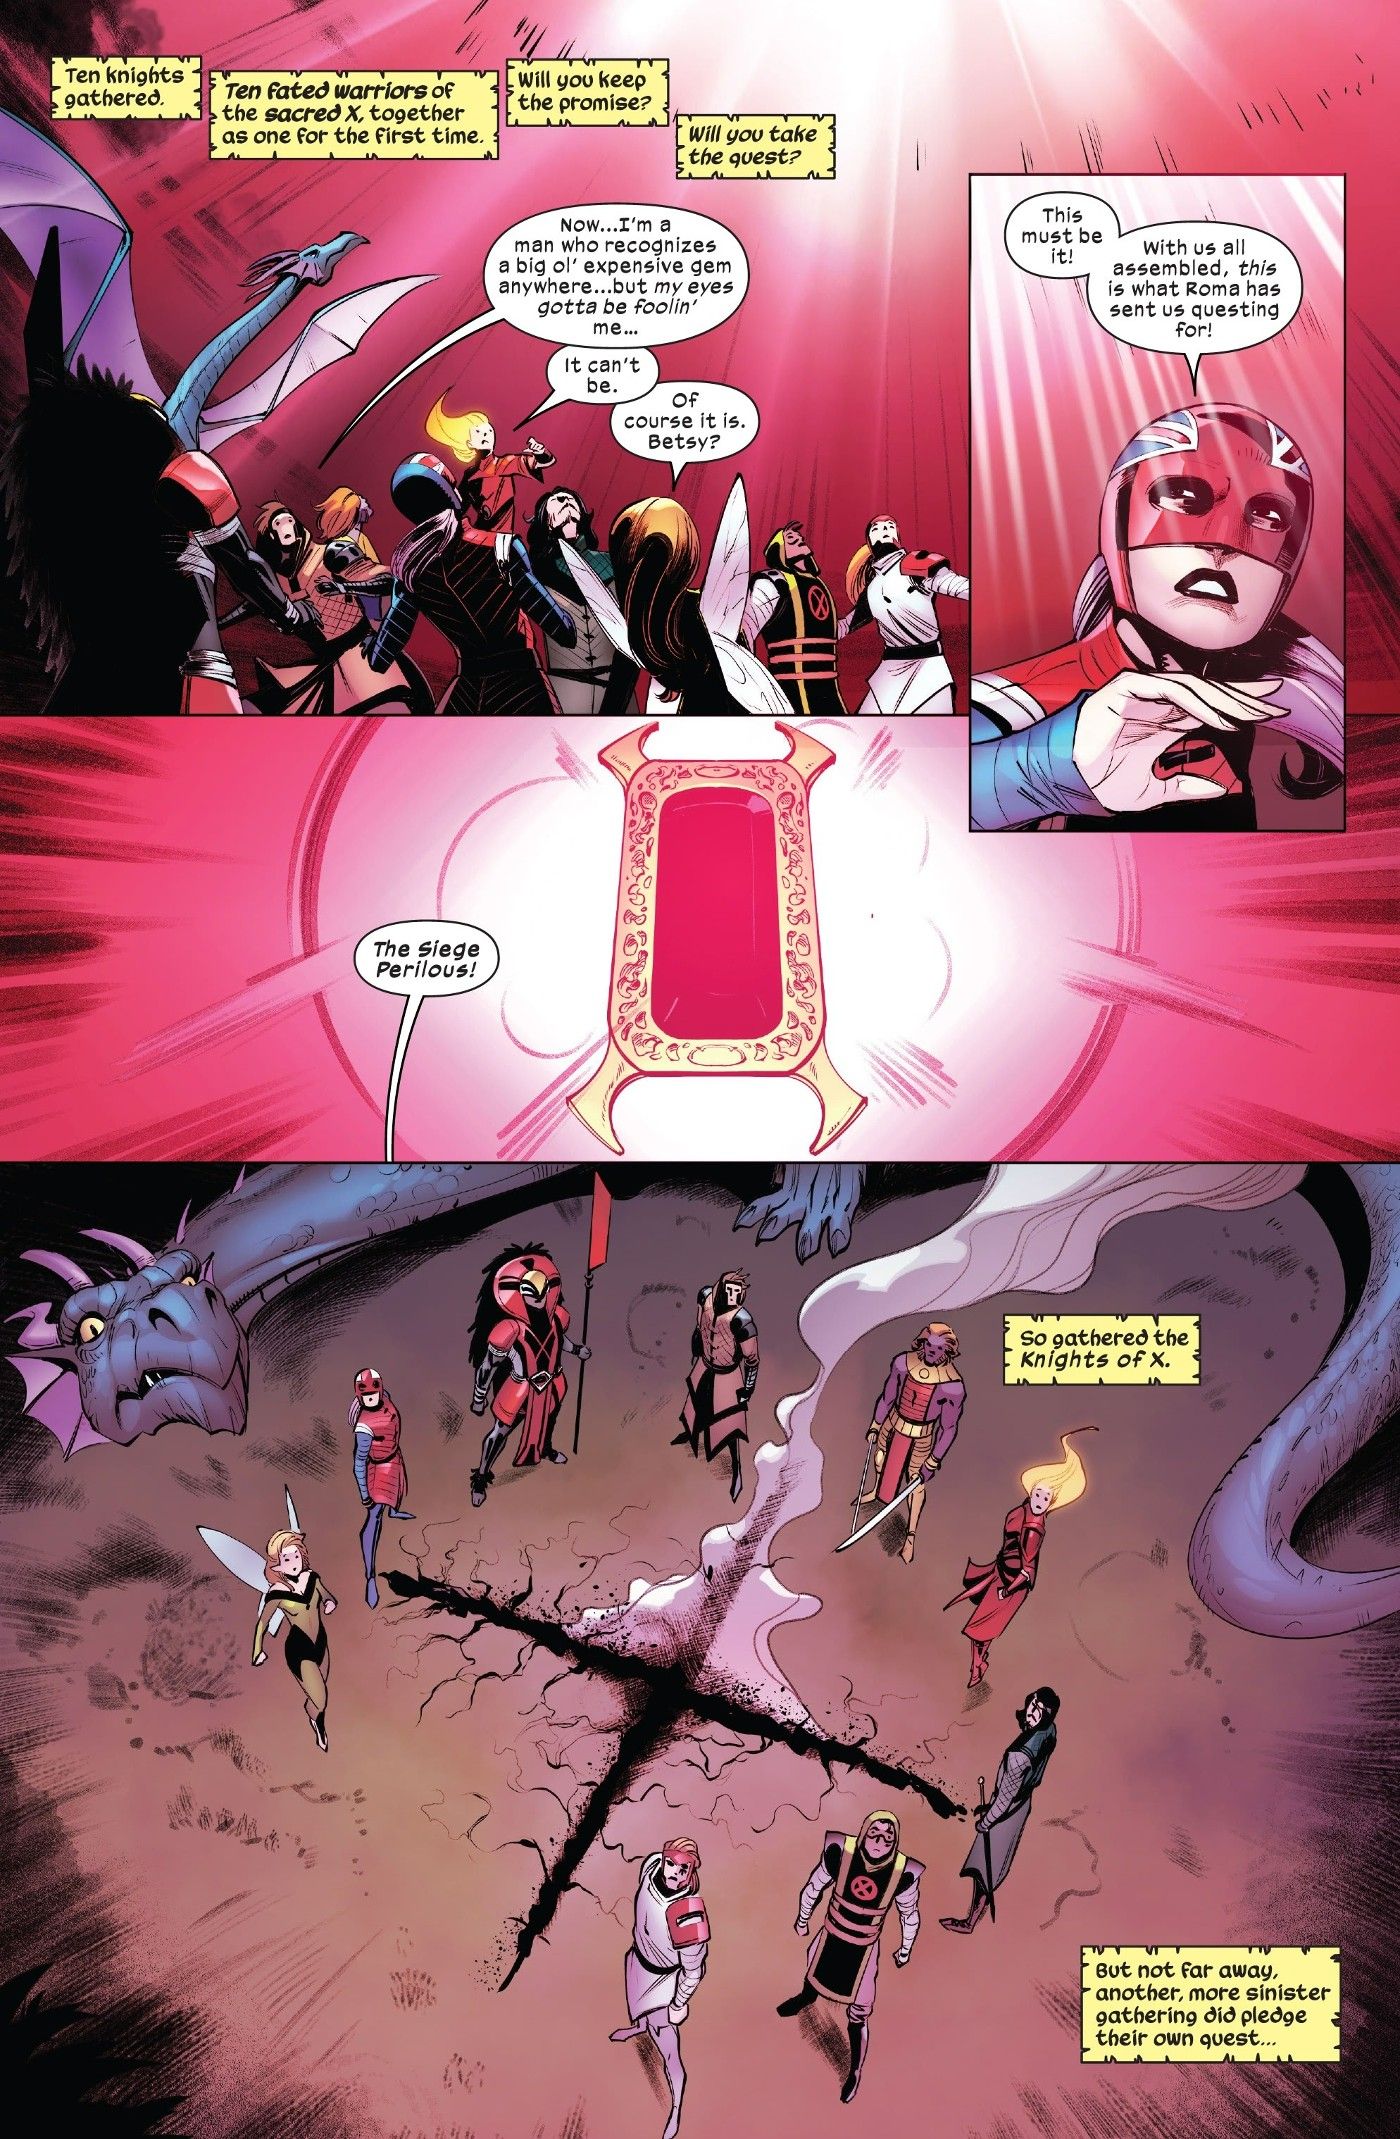 X-Men’s Most Powerful Magical Object Returns to Form the Knights of X